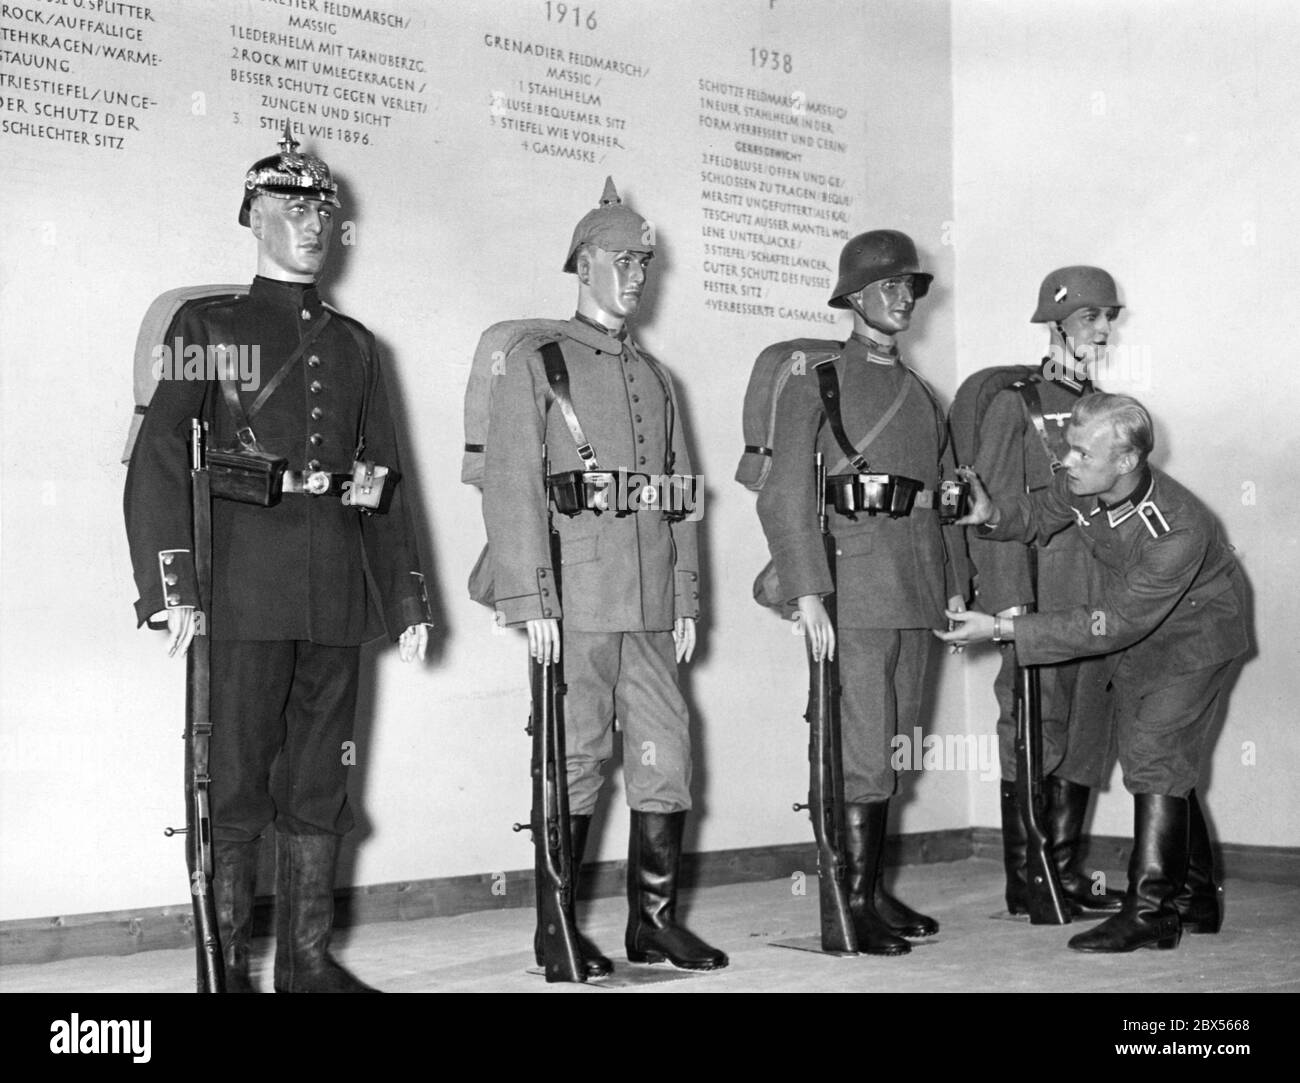 Setting up the exhibition 'Gesundes Leben - Frohes Schaffen' ( Healthy Life - Glad Work) at Kaiserdamm in Berlin.  In the Wehrmacht section are displayed various uniforms showing the hygienic development. Stock Photo